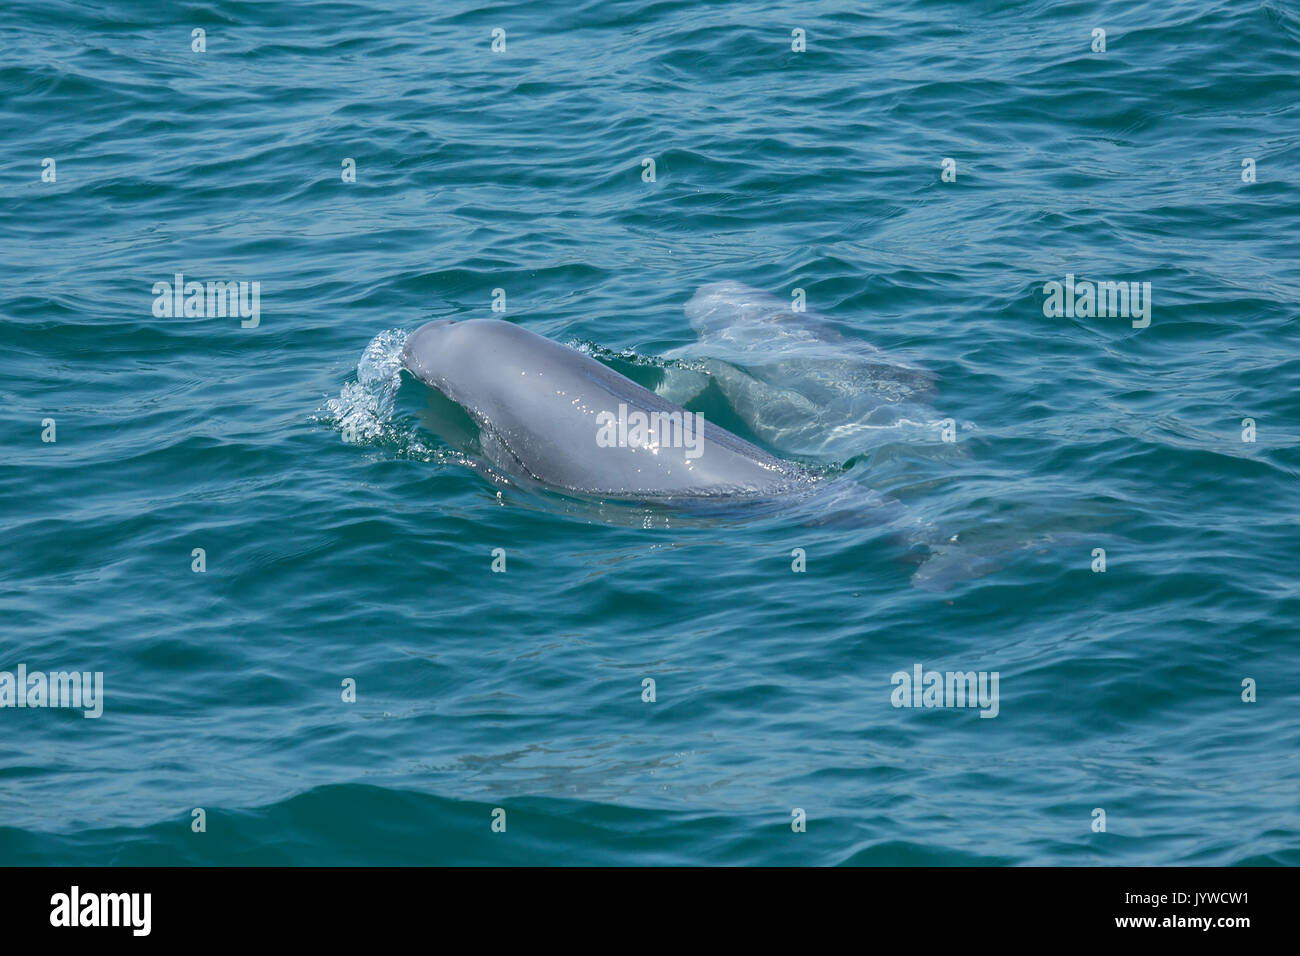 Indo-Pacific Finless Porpoise (Neophocaena phocaenoides) surfacing in Hong Kong waters Stock Photo